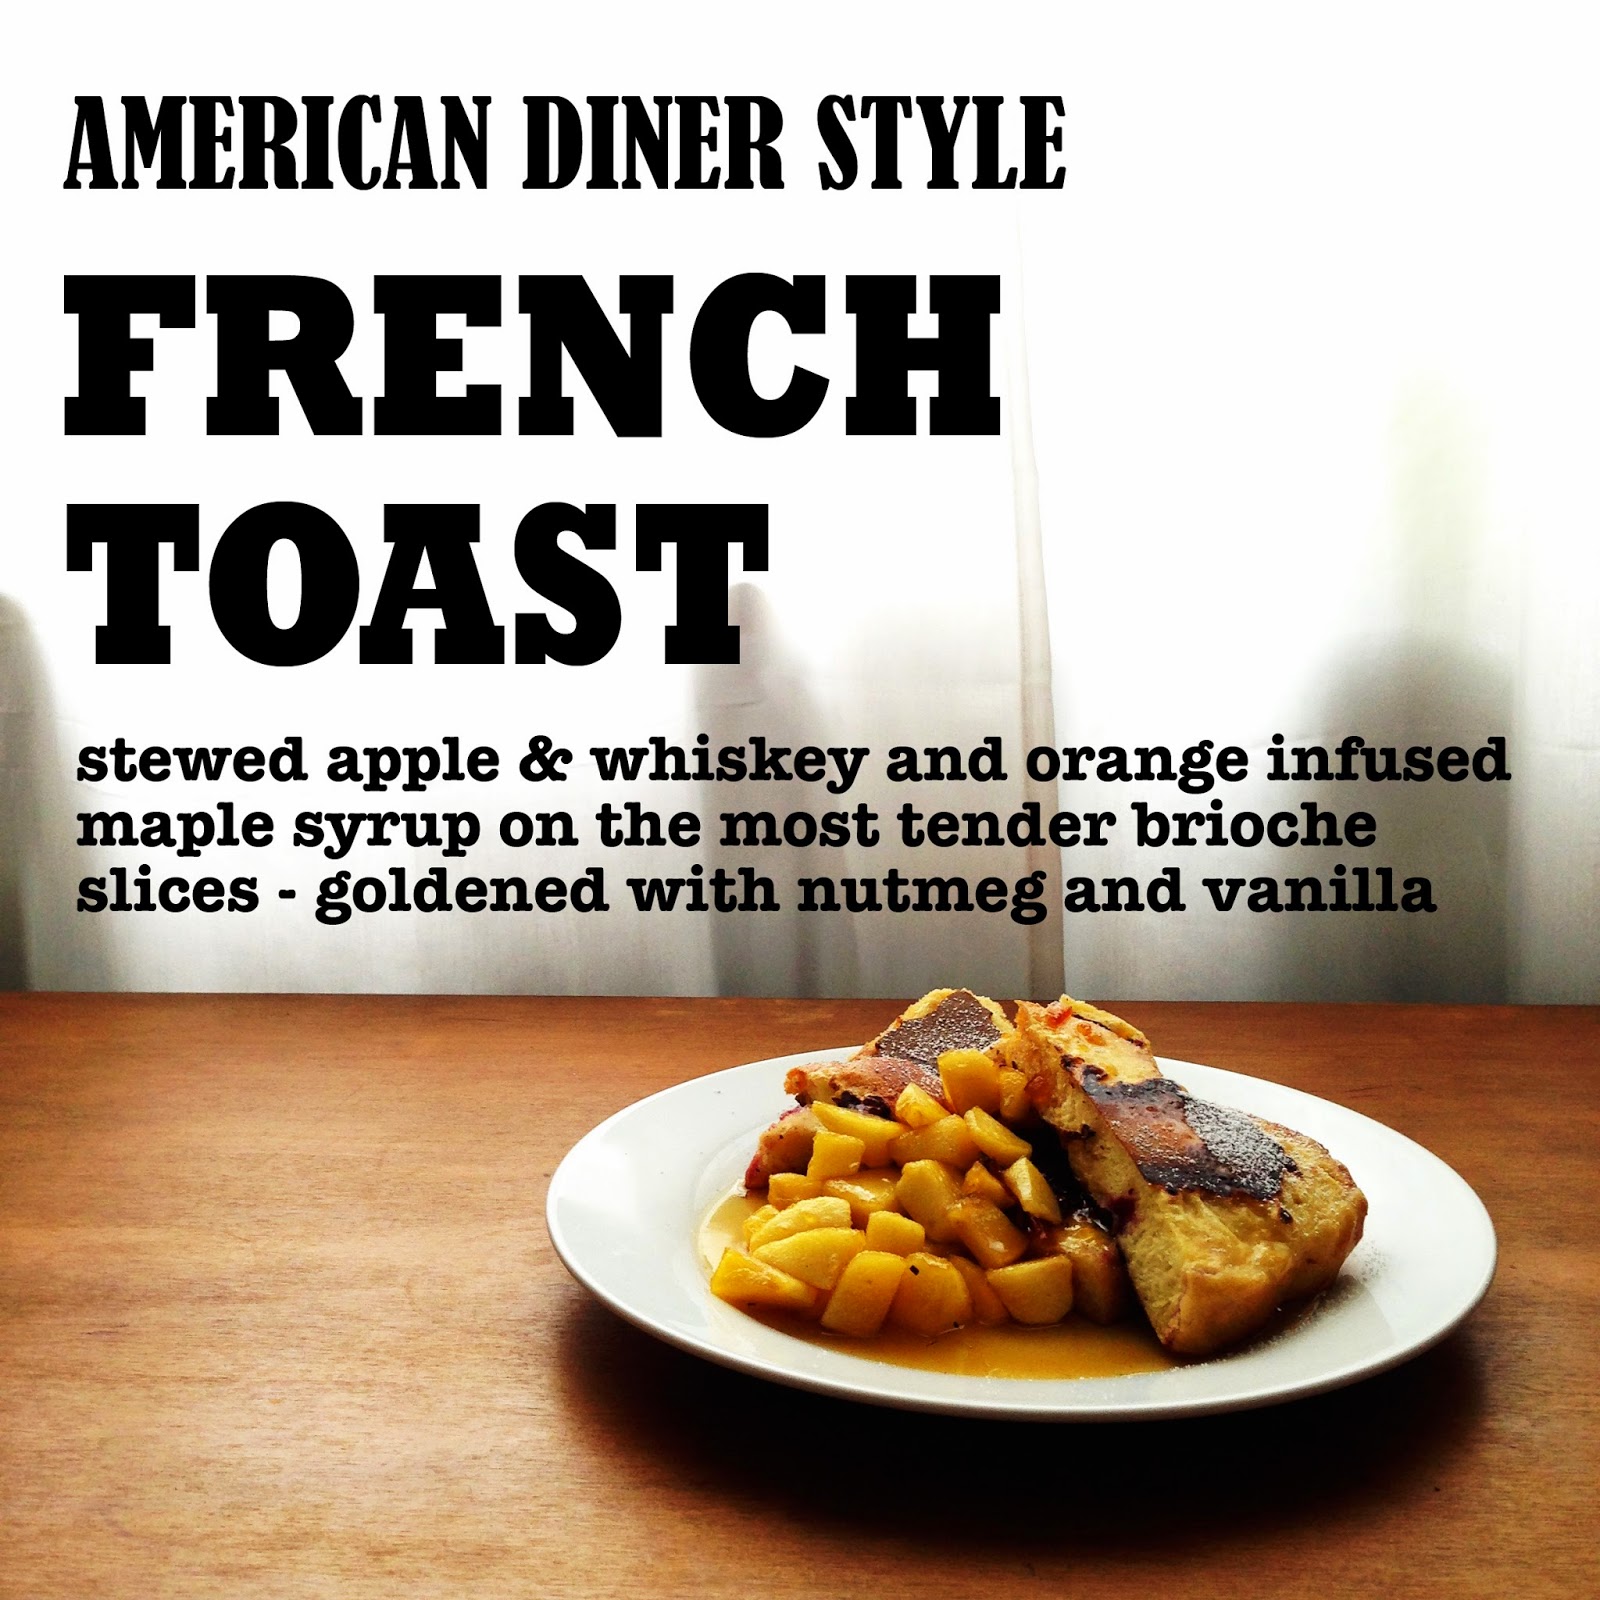 picture perfect american style brunch. { golden brioche french toast with diced apple, stewed on whiskey-orange infused maple syrup }